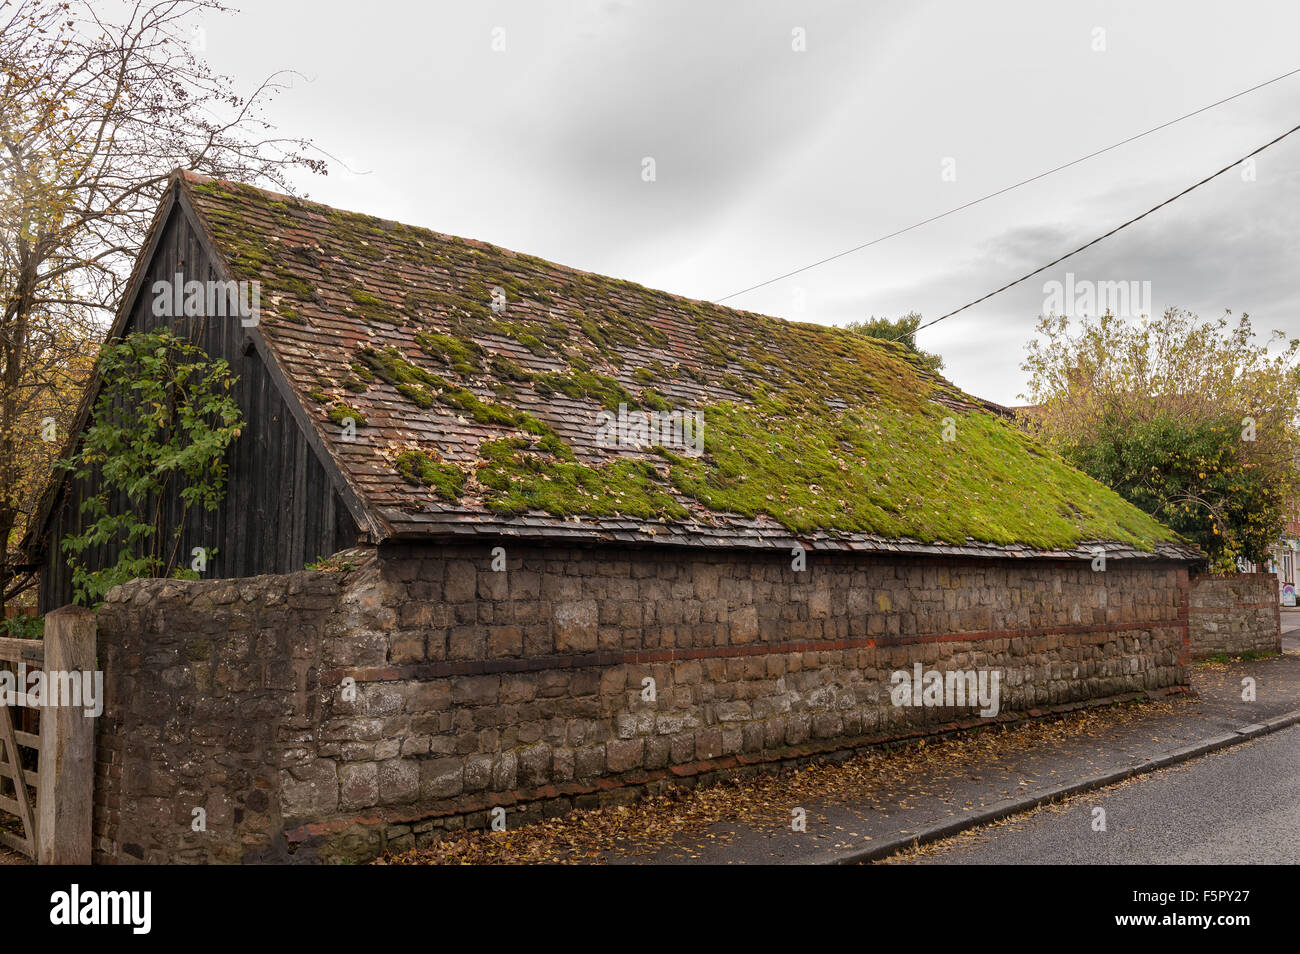 Old barn house roof coated in a thick layer of moss retaining water and dampness after rain shower leaking clay tiles Stock Photo